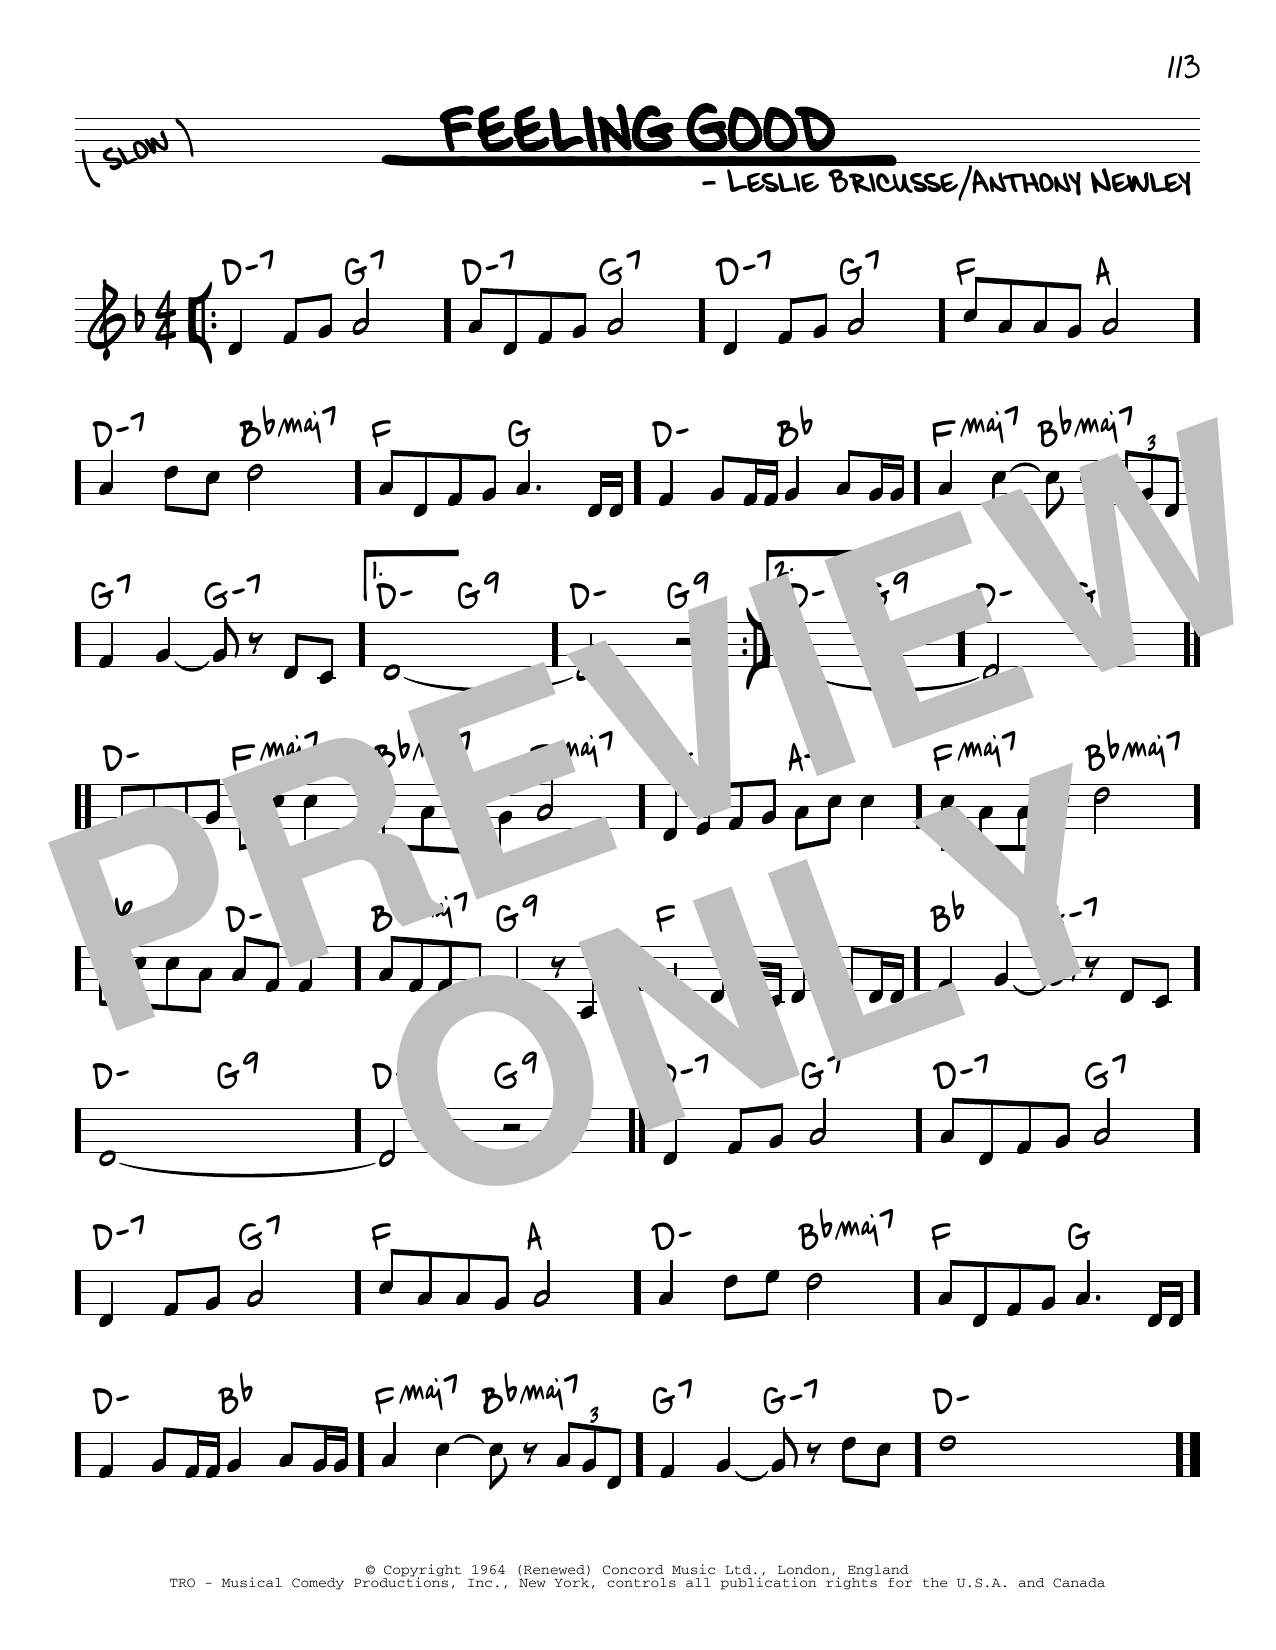 Download Leslie Bricusse and Anthony Newley Feeling Good Sheet Music